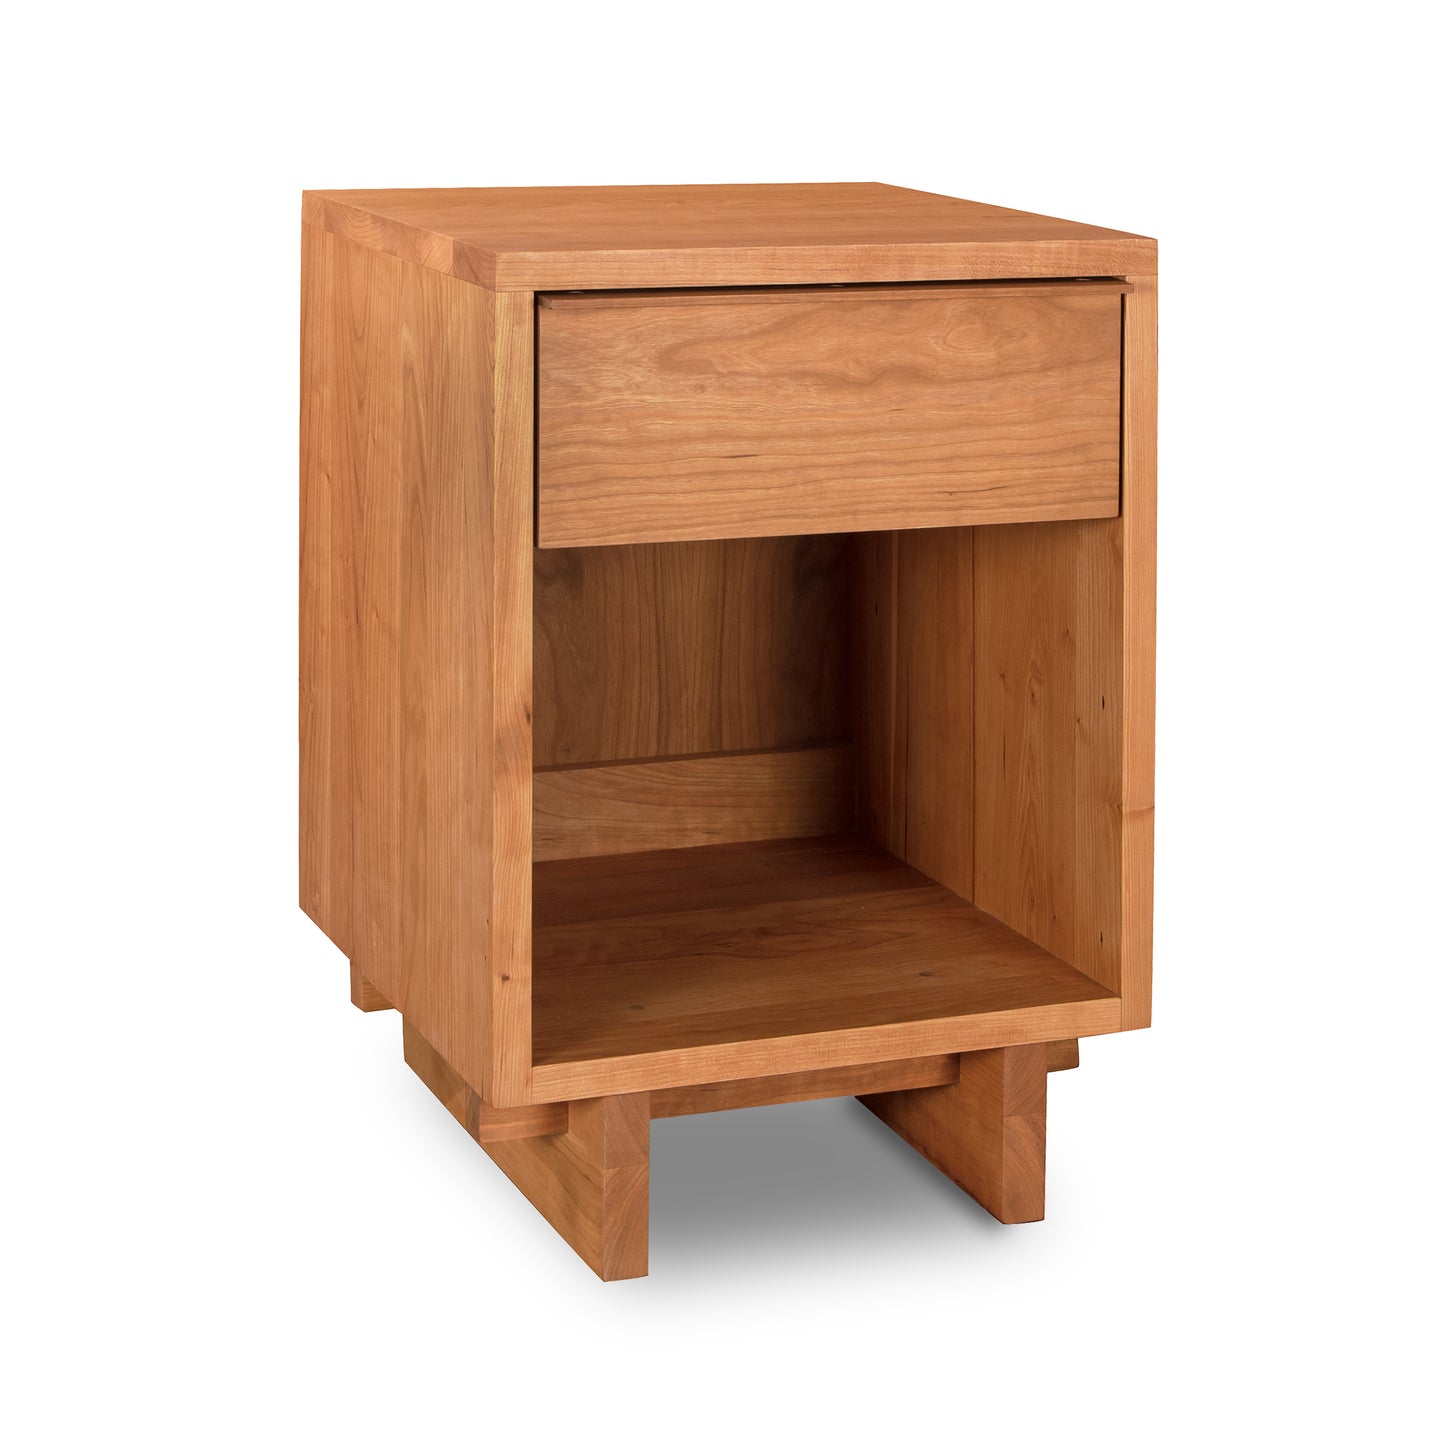 A fine Vermont Furniture Designs Kipling 1-Drawer Enclosed Shelf Nightstand with a single drawer on top.